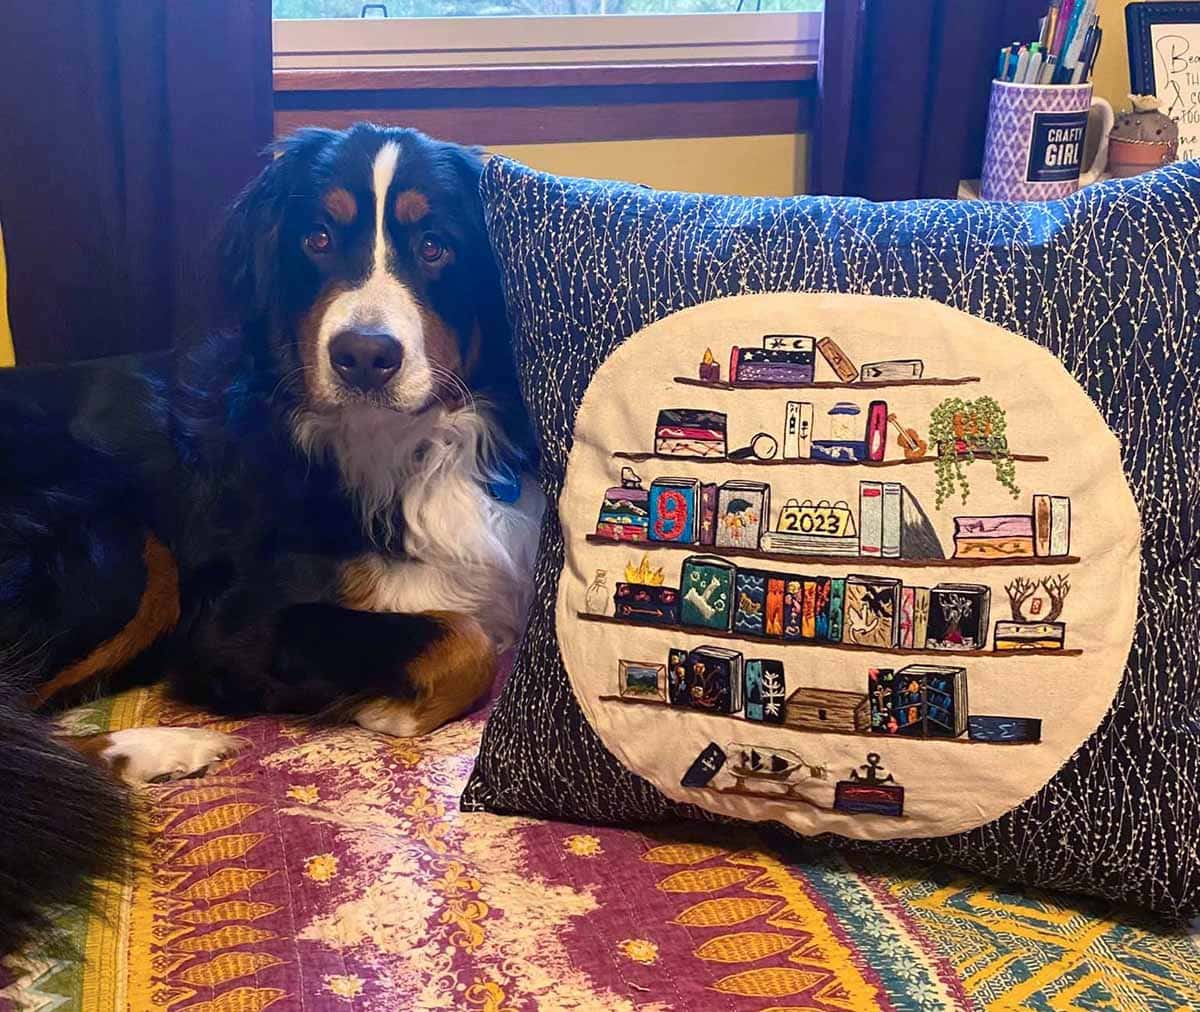 embroidered journal displays every book that the artist read for 1 year. it is featured on the front of a large blue pillow, which sits next to her Australian Shepard. 